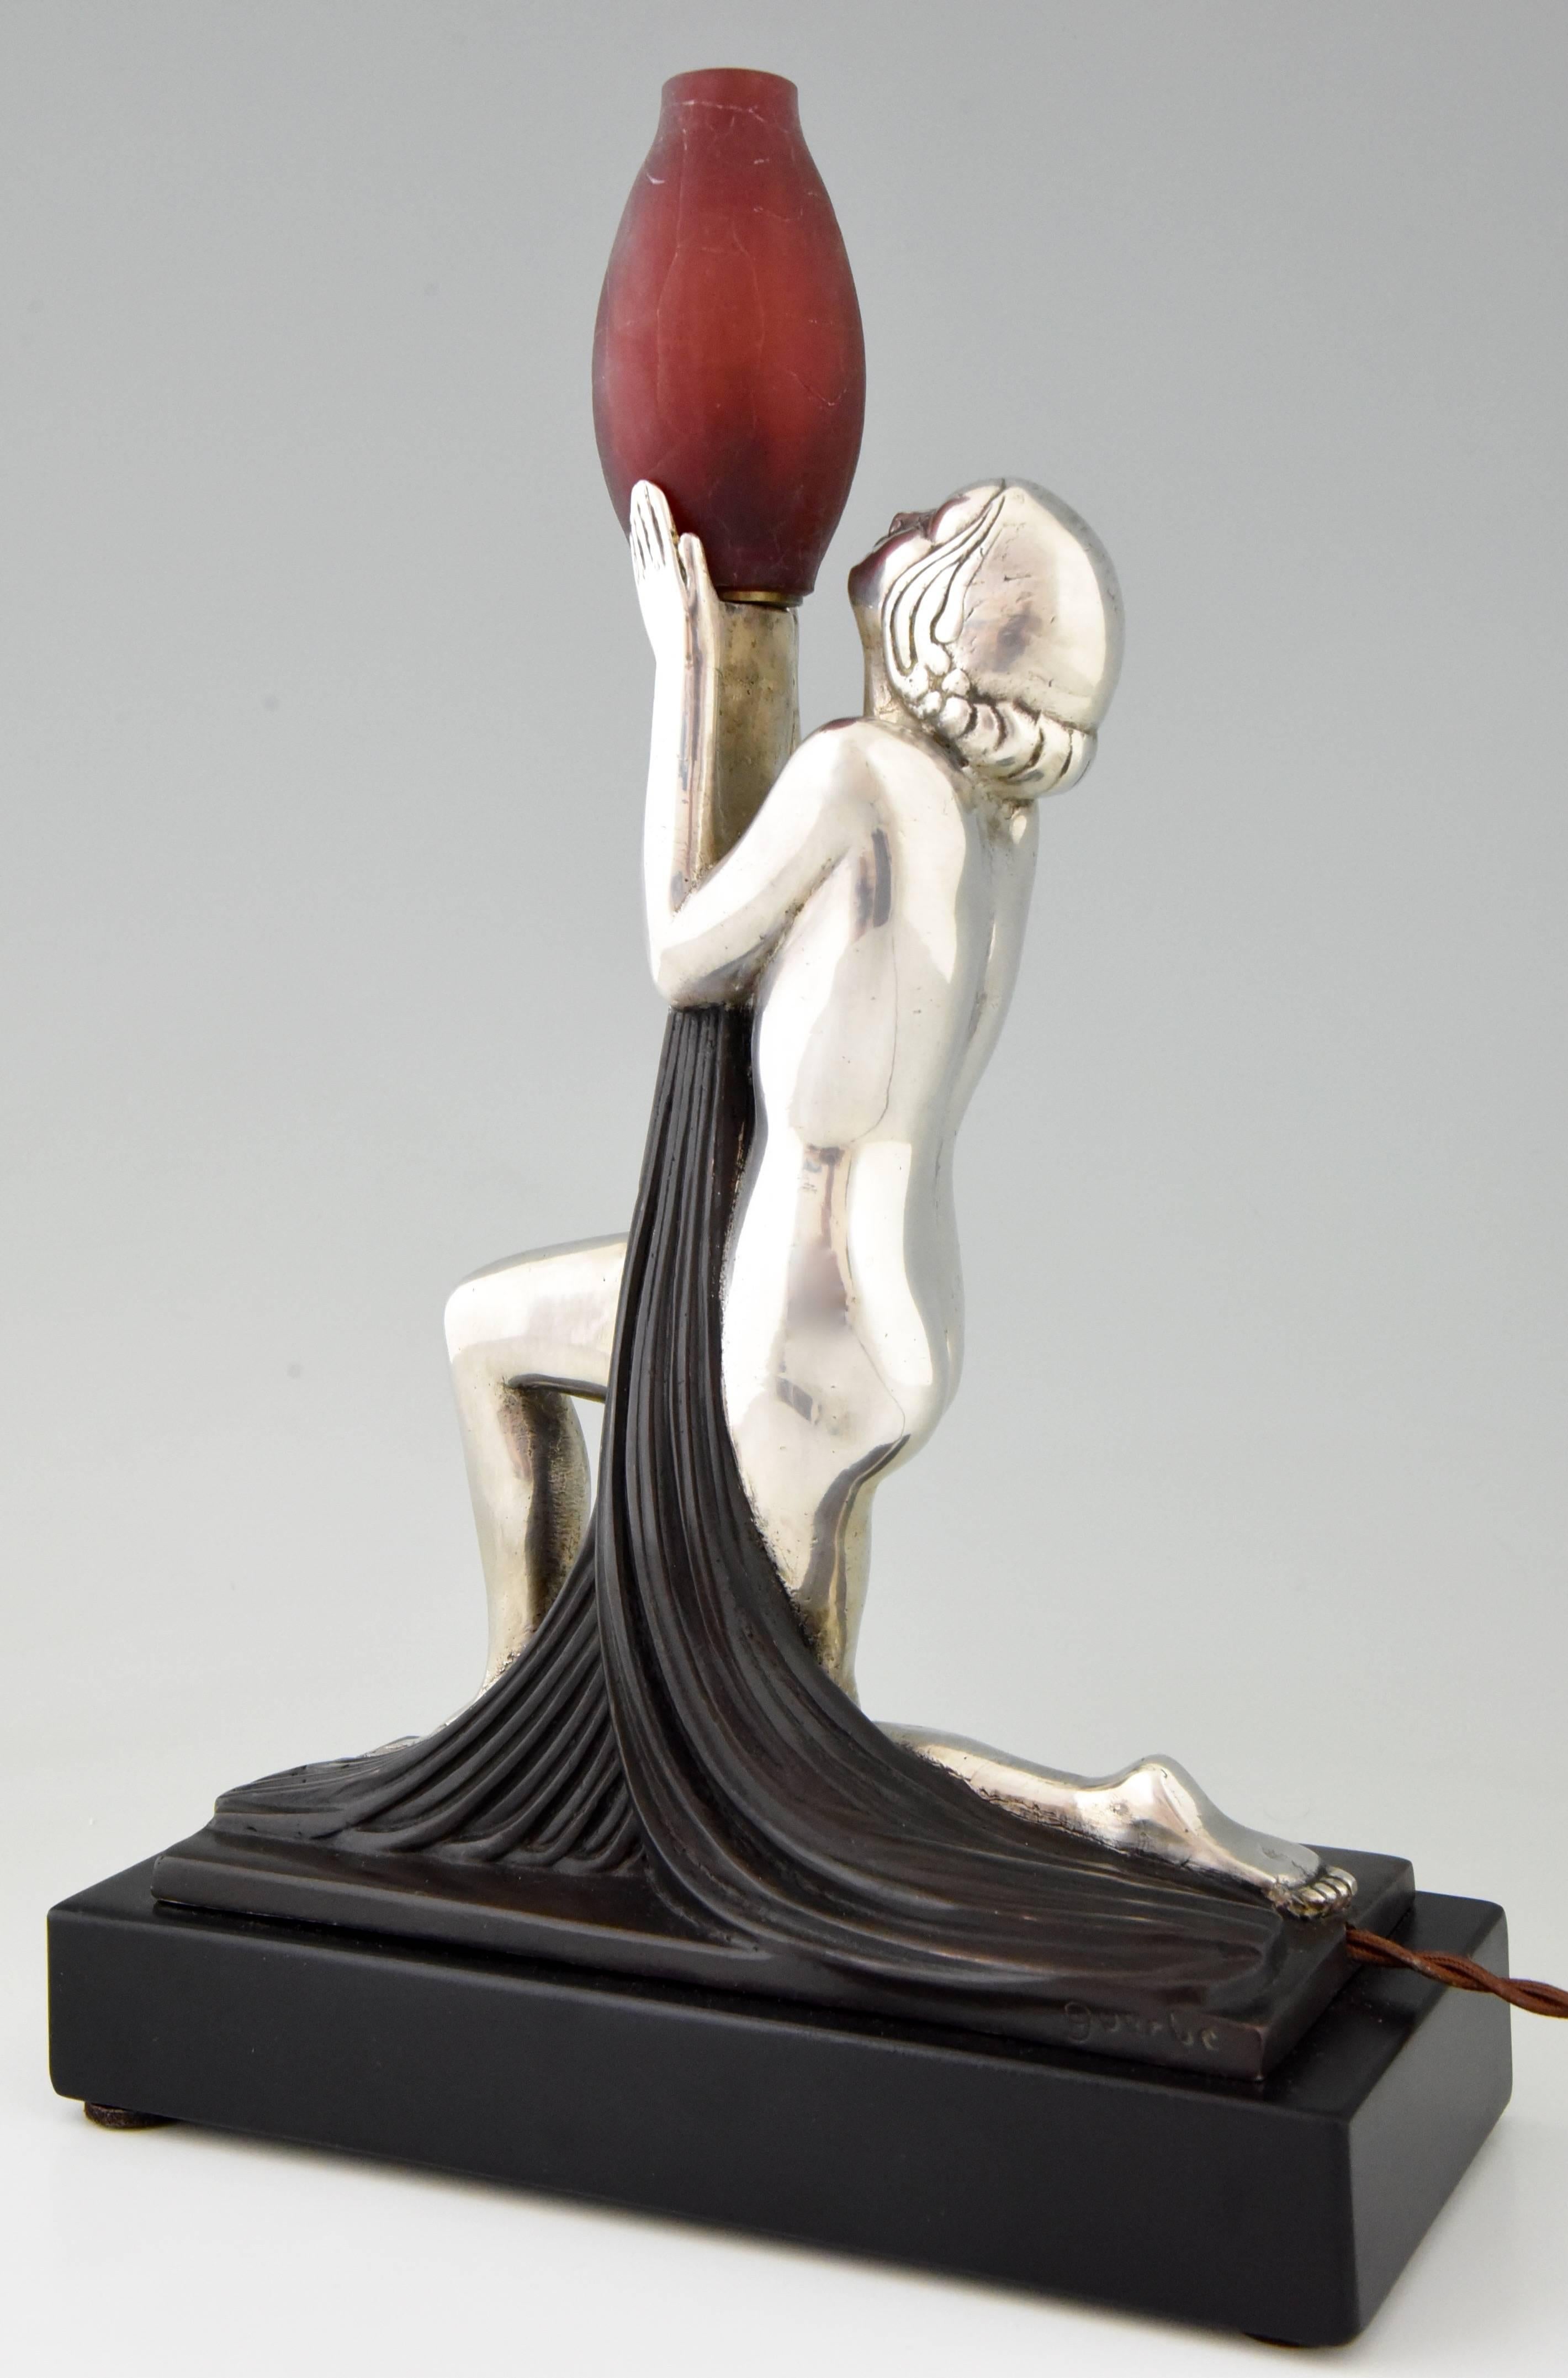 Elegant Art Deco silvered bronze lamp modeled as a kneeling nude holding a vase by Raymonde Guerbe, the wife of Pierre Le Faguays.

Artist/maker:
Raymonde Guerbe.
Signature/marks:
Guerbe.
Style:
Art Deco.
Date:
1930.
Material:
Silvered